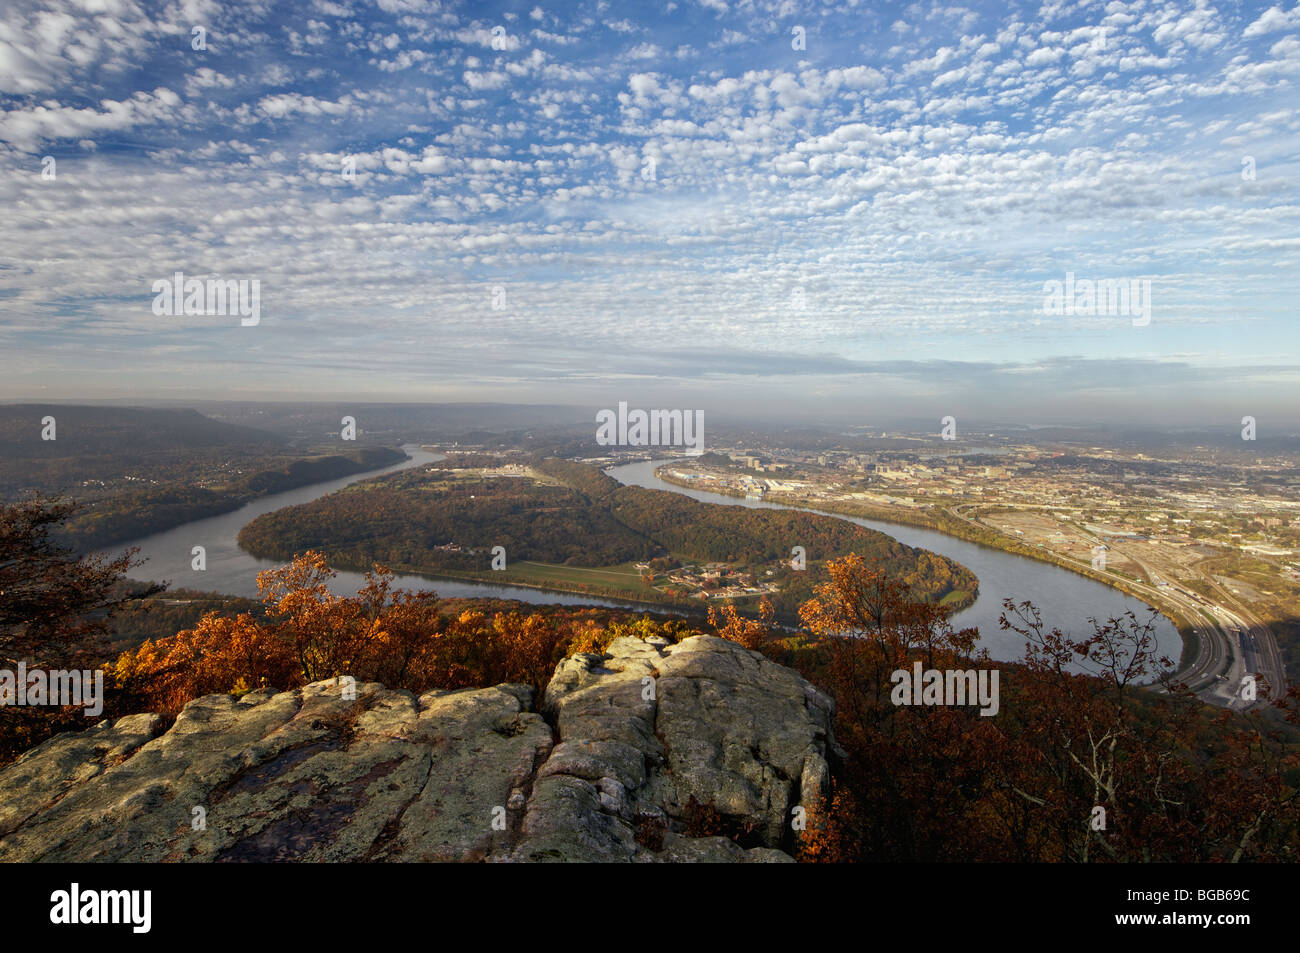 View of Moccasin Bend in the Tennesse River and the City of Chattanooga Tennessee from Lookout Mountain Stock Photo